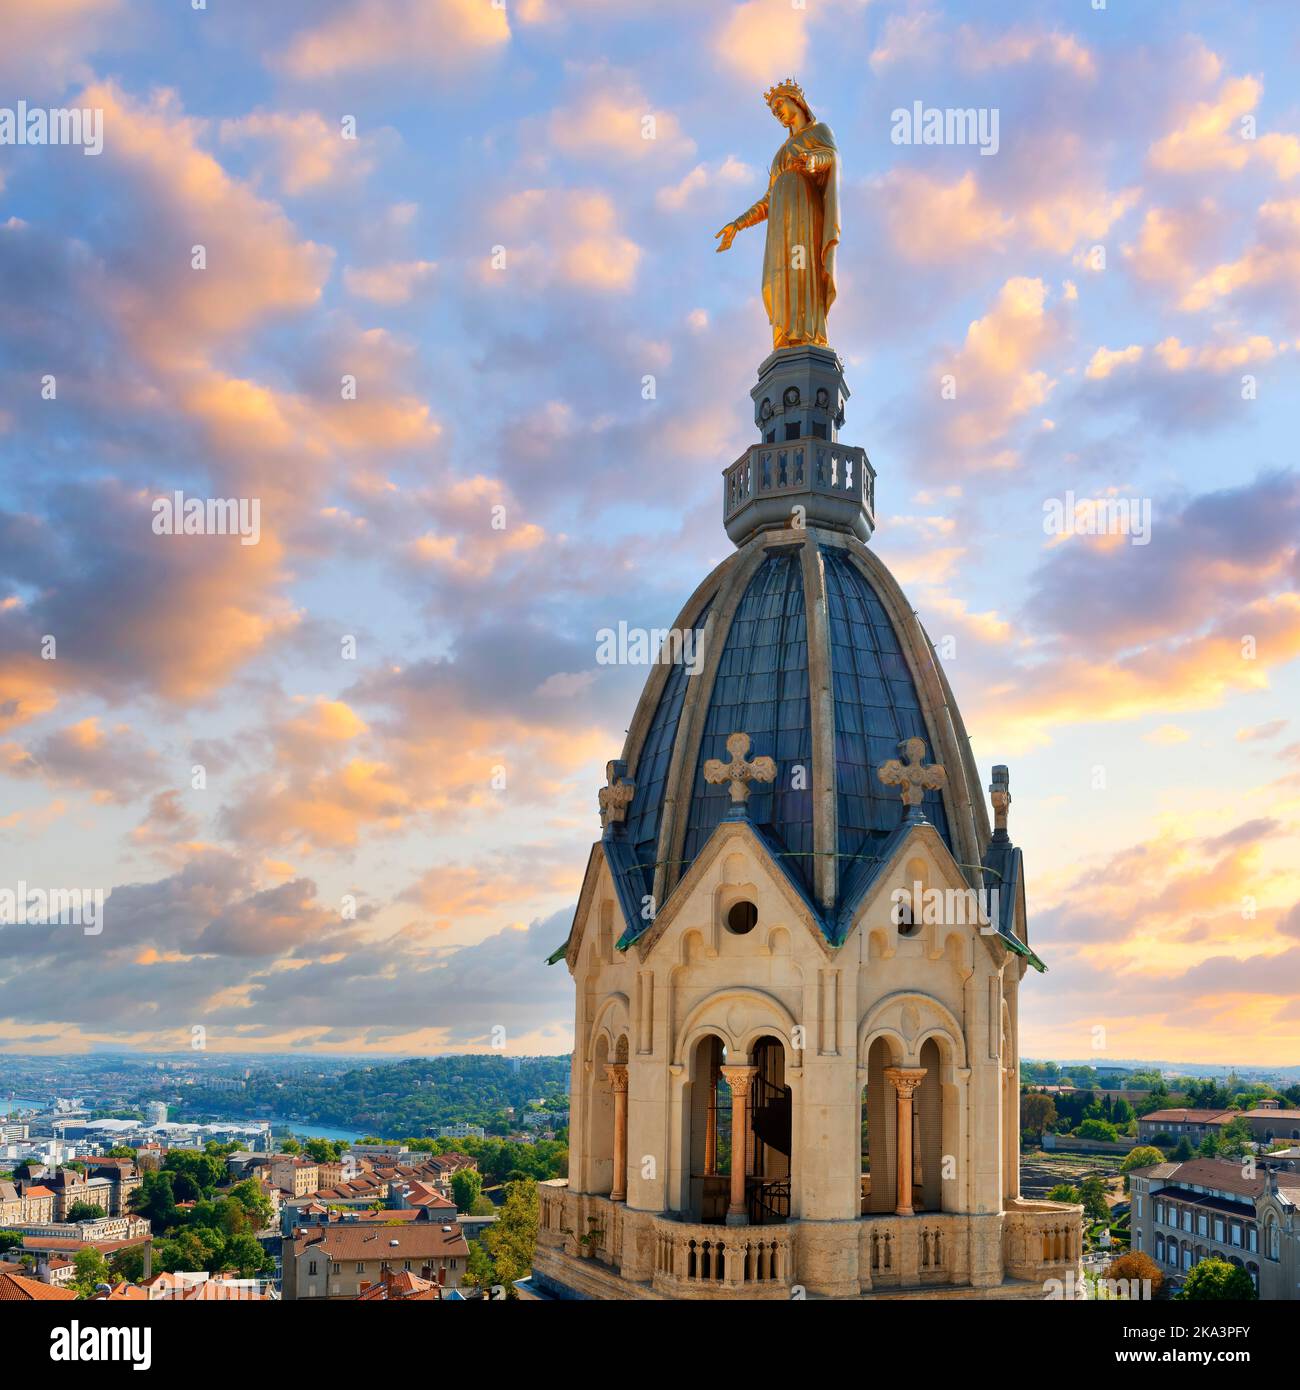 View of famous Marie statue on top of Notre-dame-de-fourviere basilica in Lyon at sunset, France Stock Photo